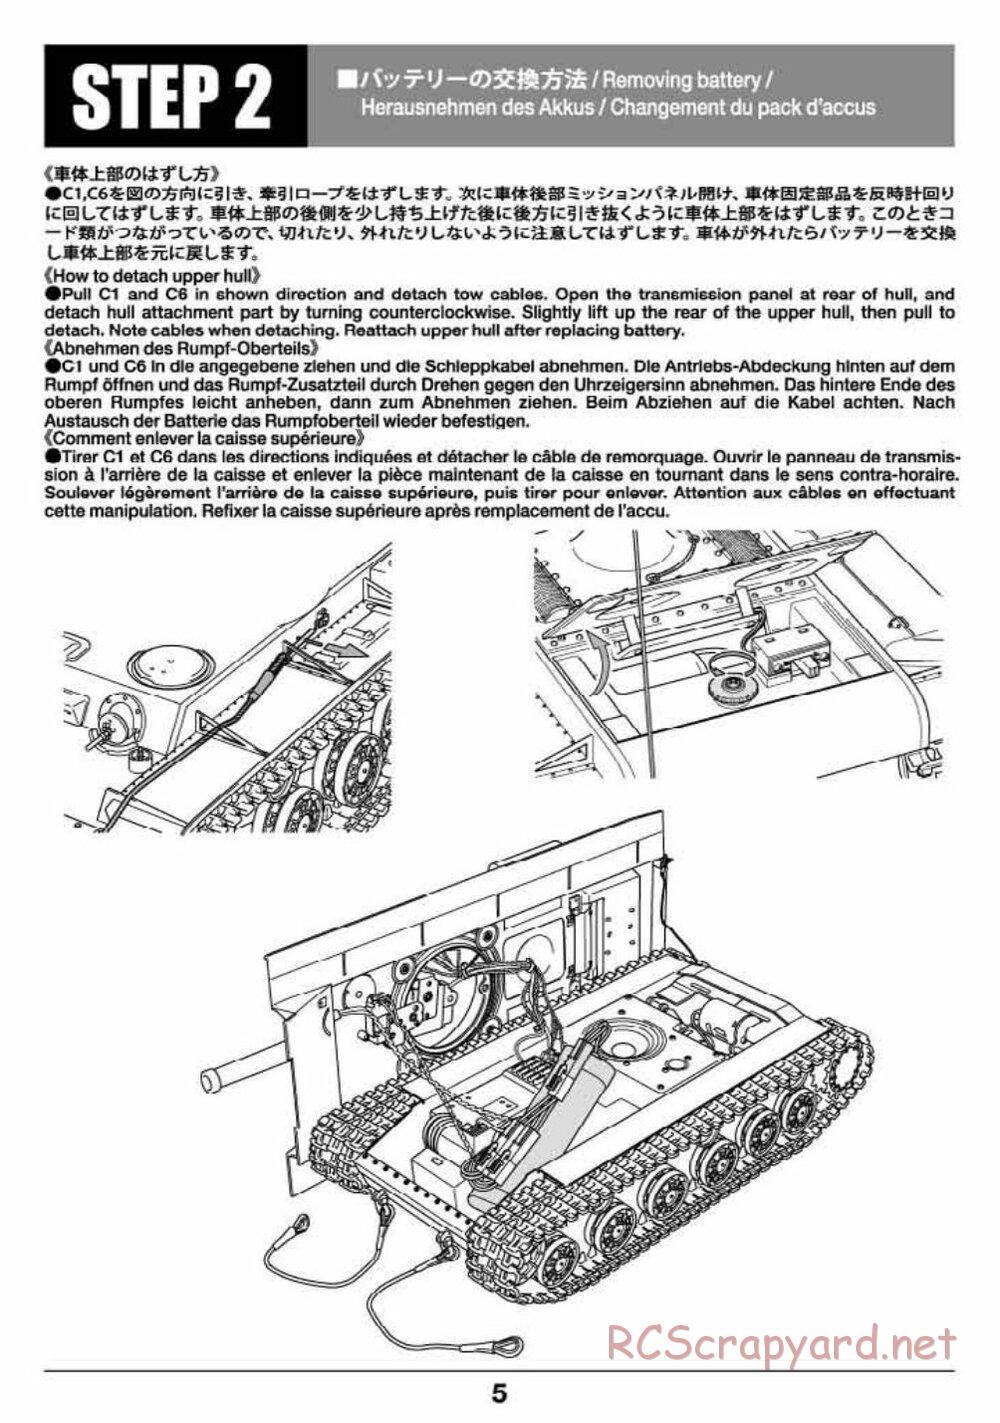 Tamiya - Russian Heavy Tank KV-2 Gigant - 1/16 Scale Chassis - Operation Manual - Page 5